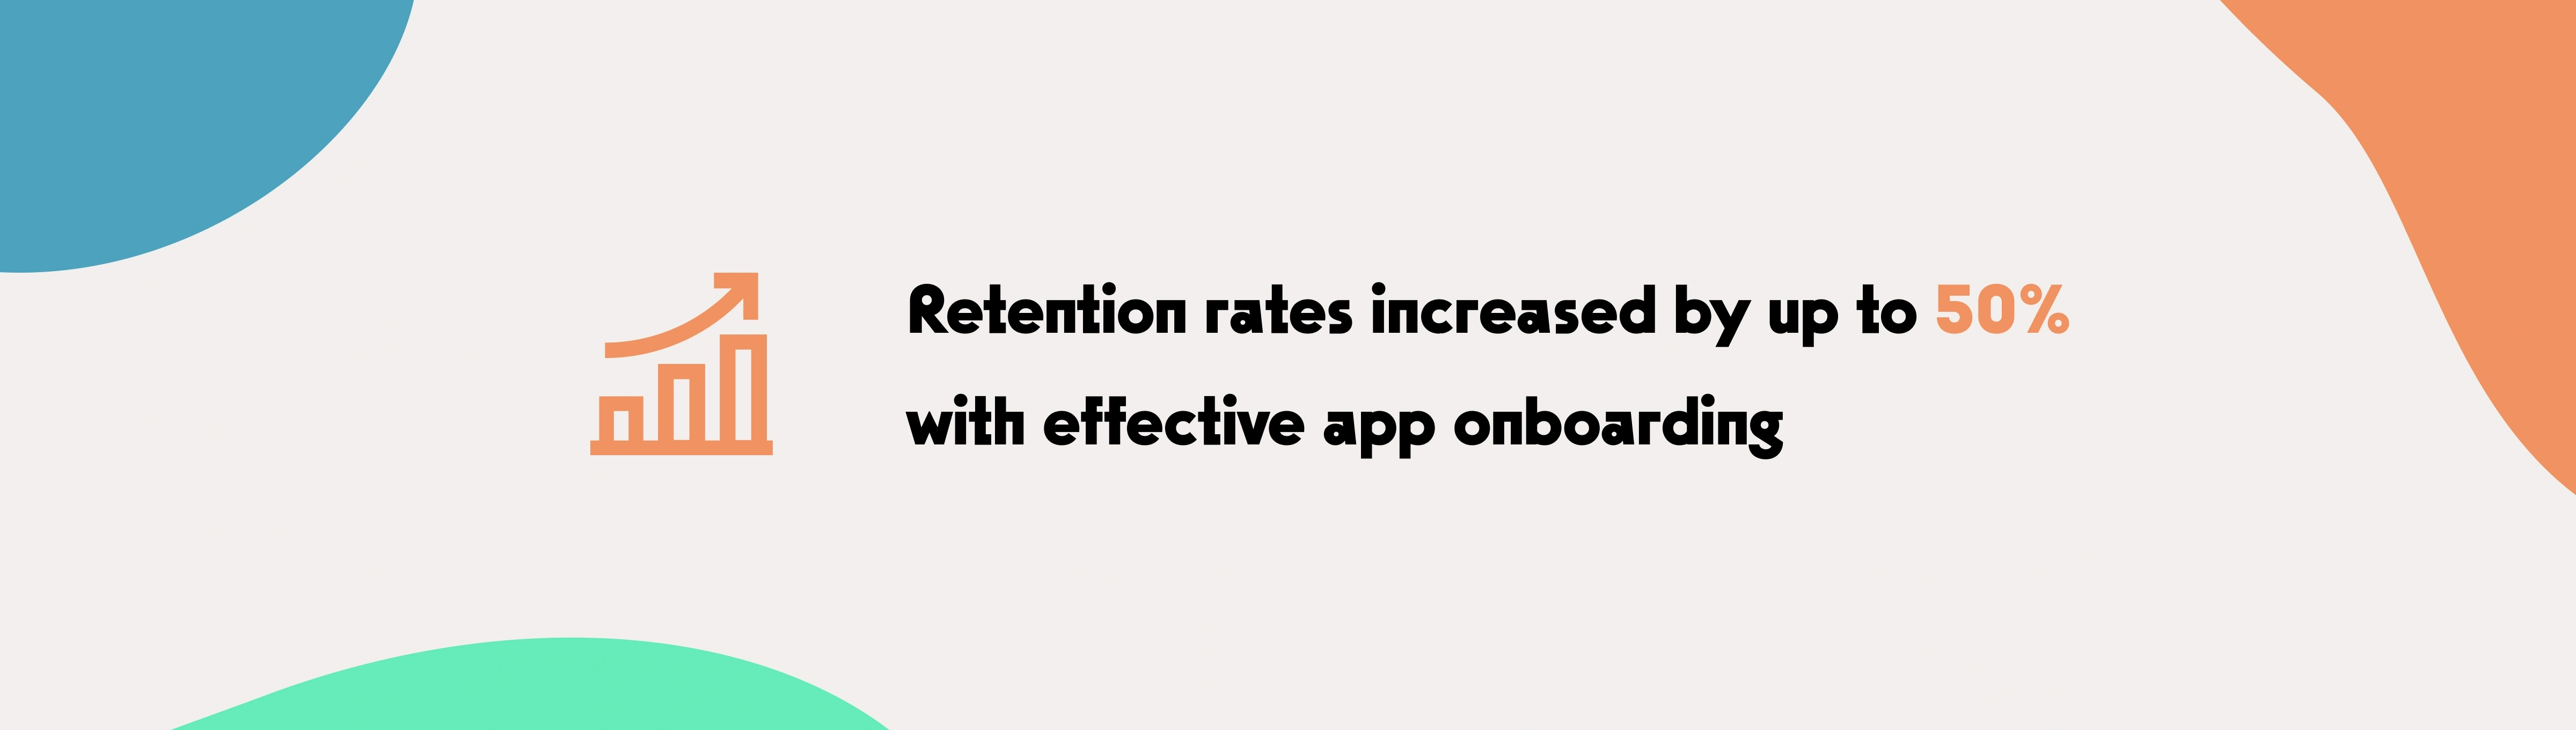 Retention rates increased by up to 50% with effective app onboarding